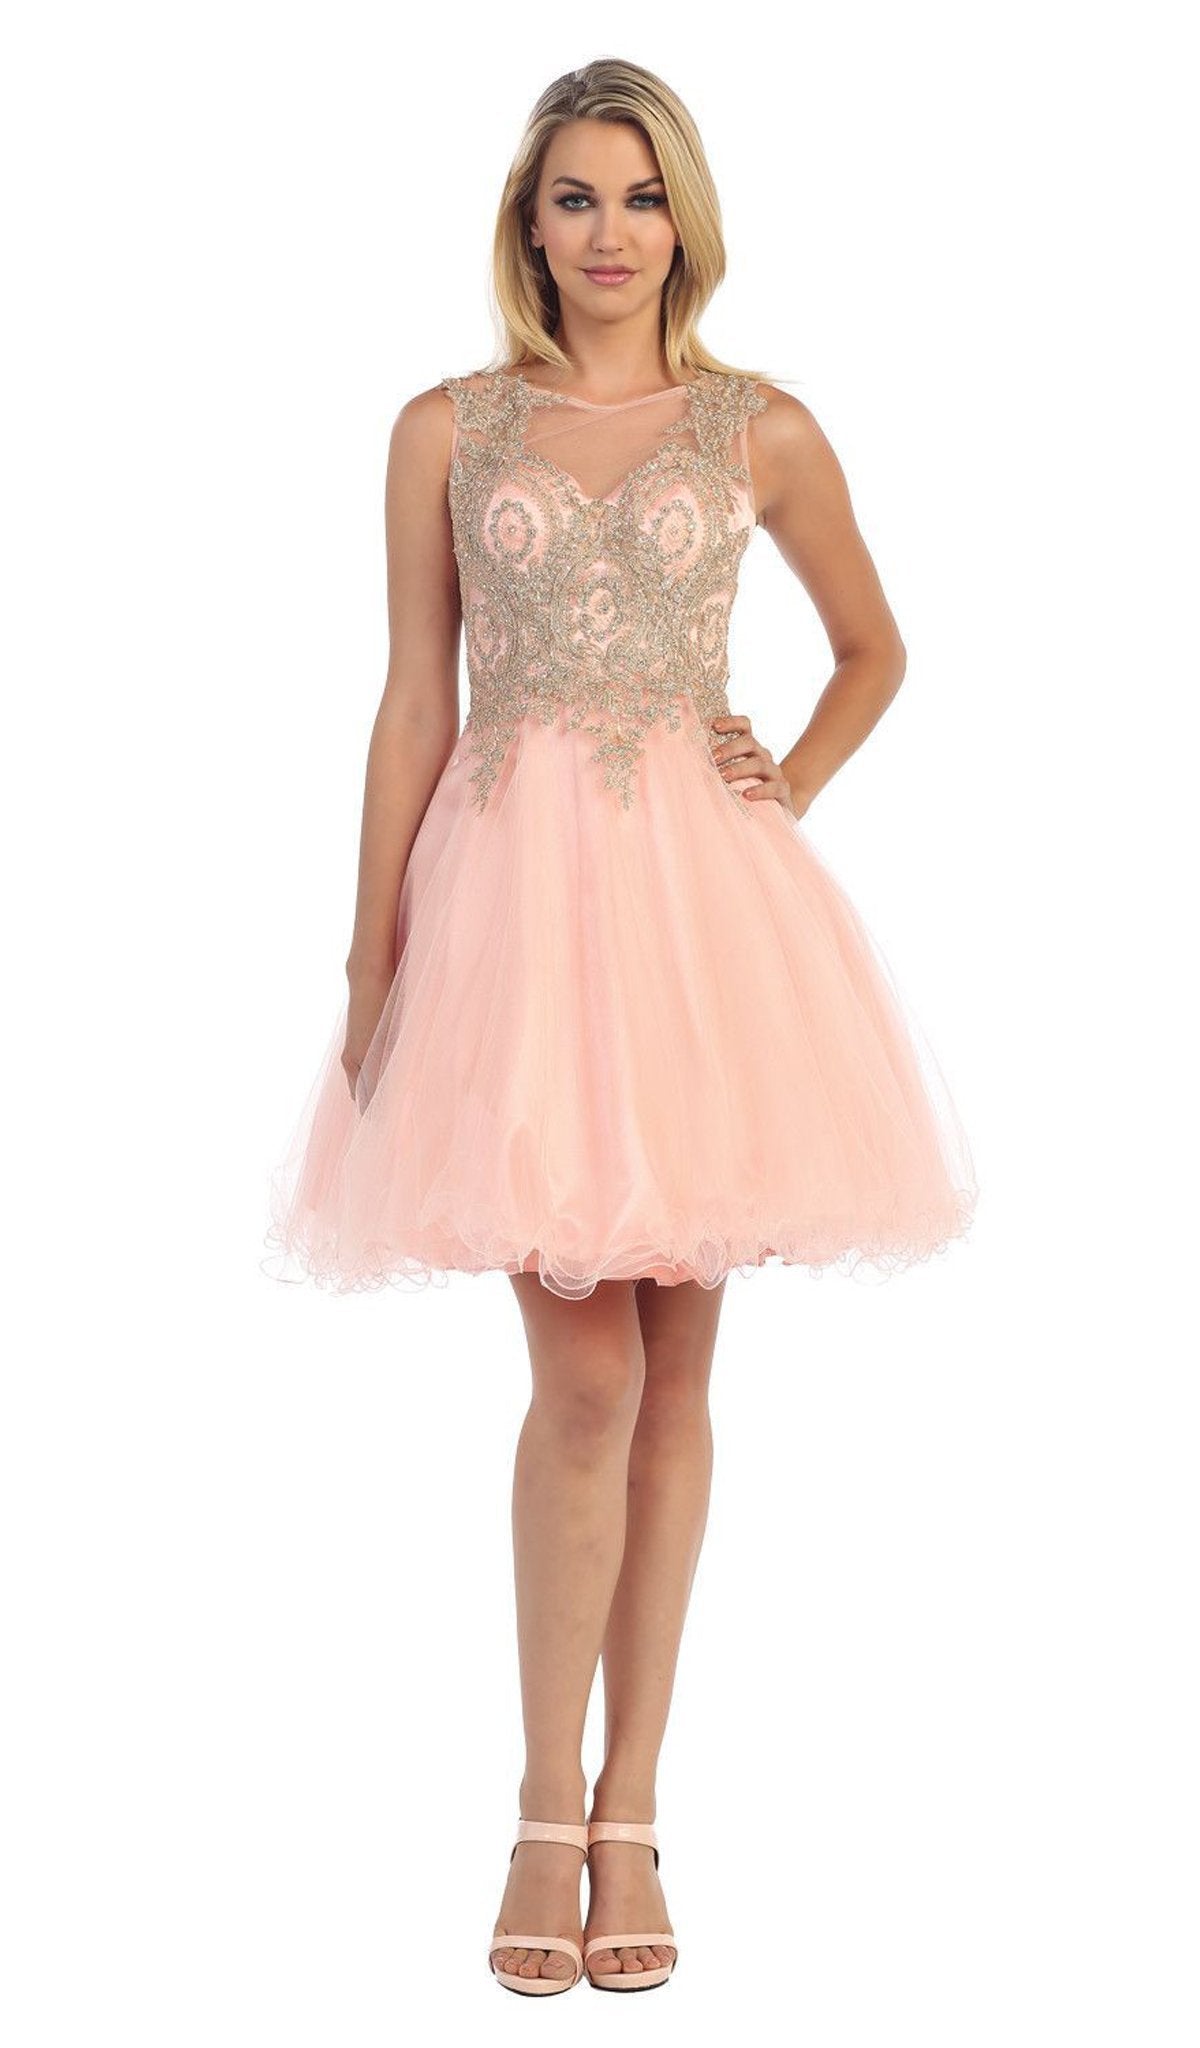 May Queen - Sleeveless Ornate Lace Illusion Cocktail Dress Special Occasion Dress 2 / Blush